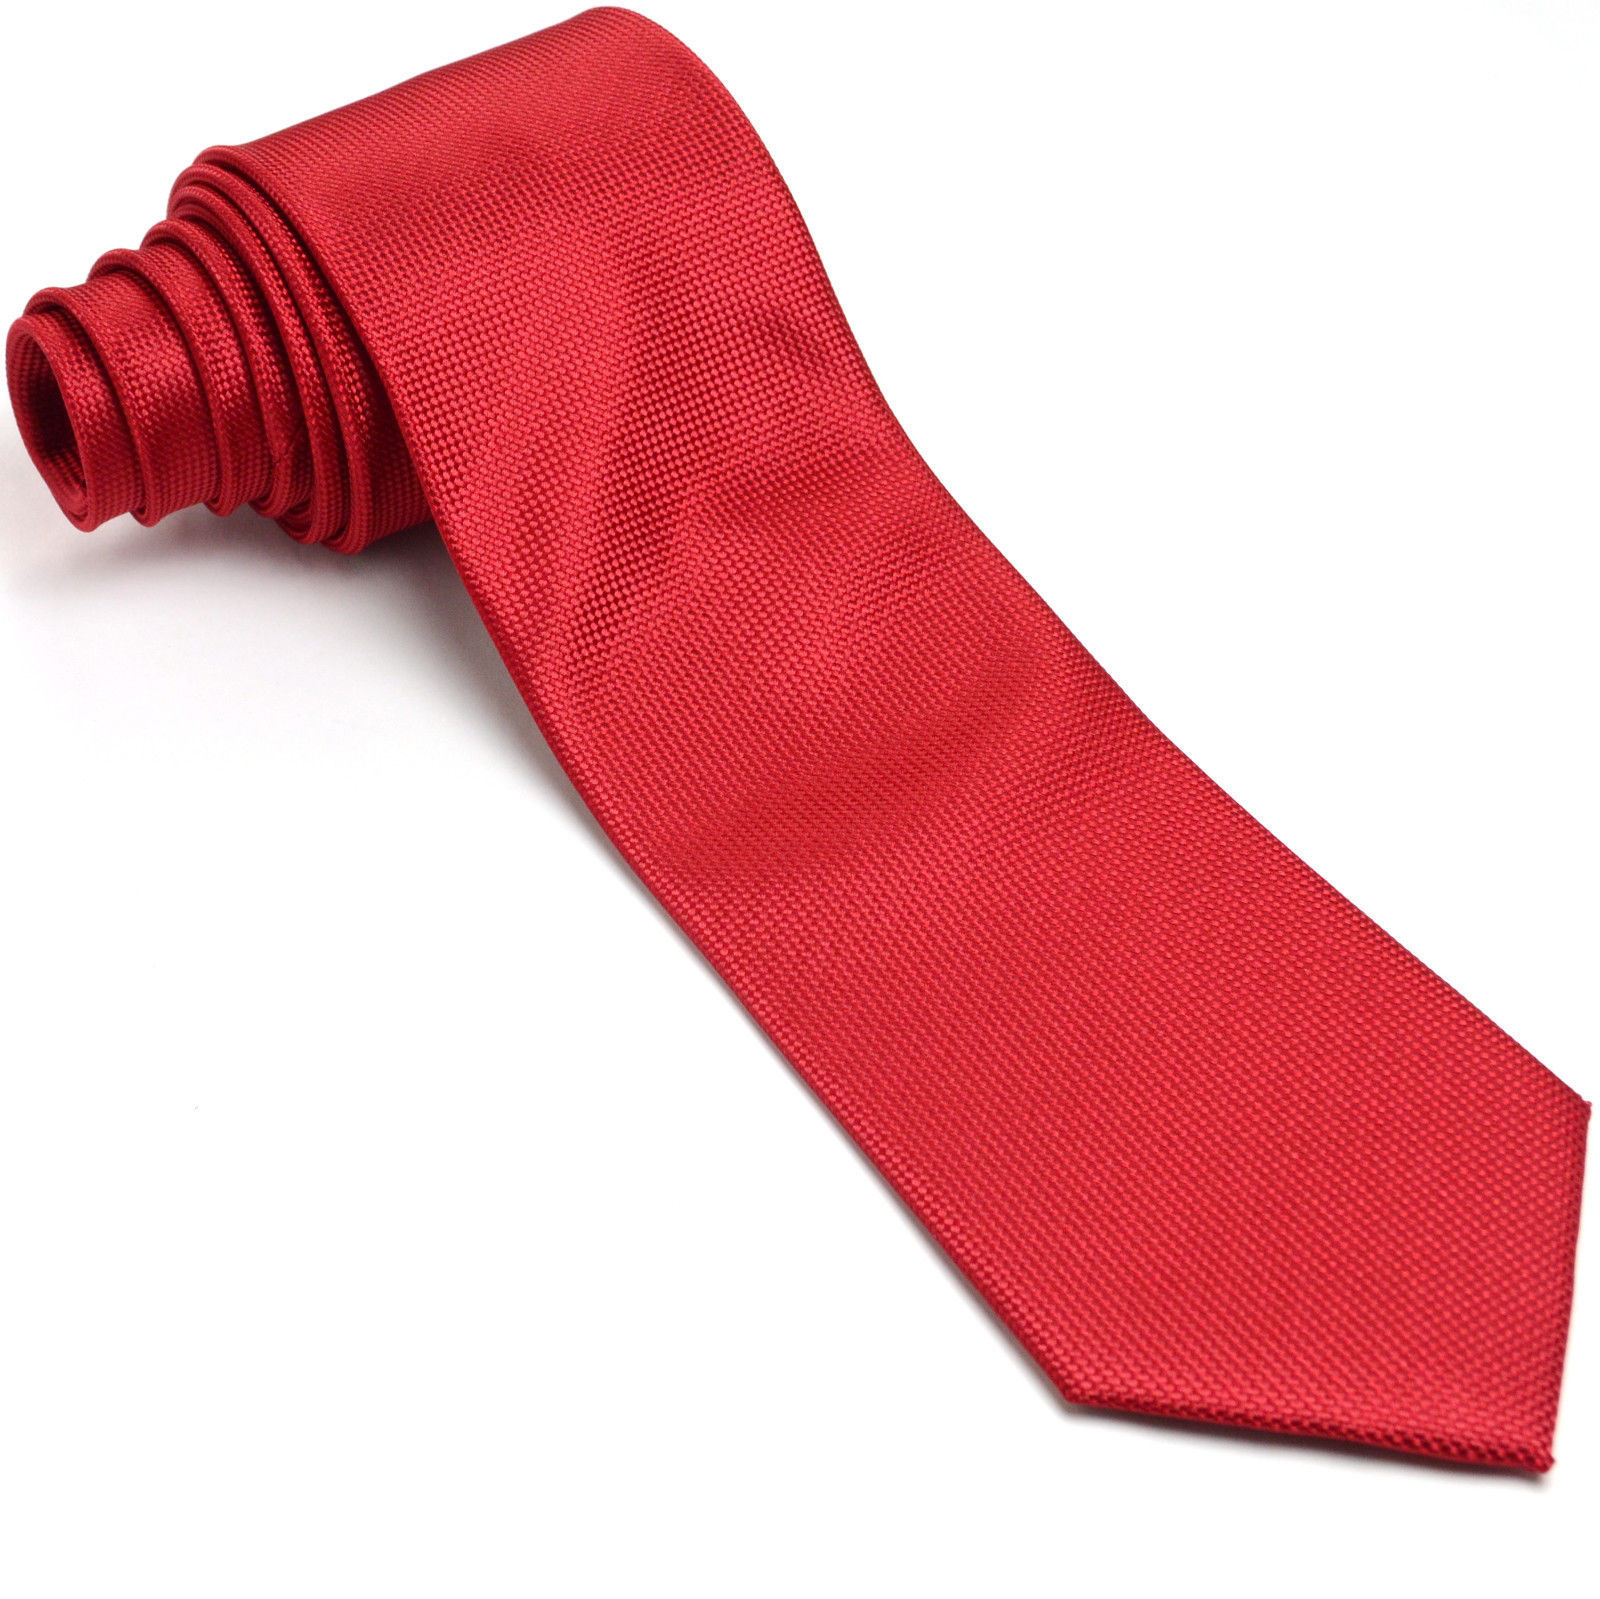 NEW NWT GEOFFREY BEENE 57L Red Woven Skinny Polyester Mens Neck Tie - $16.83